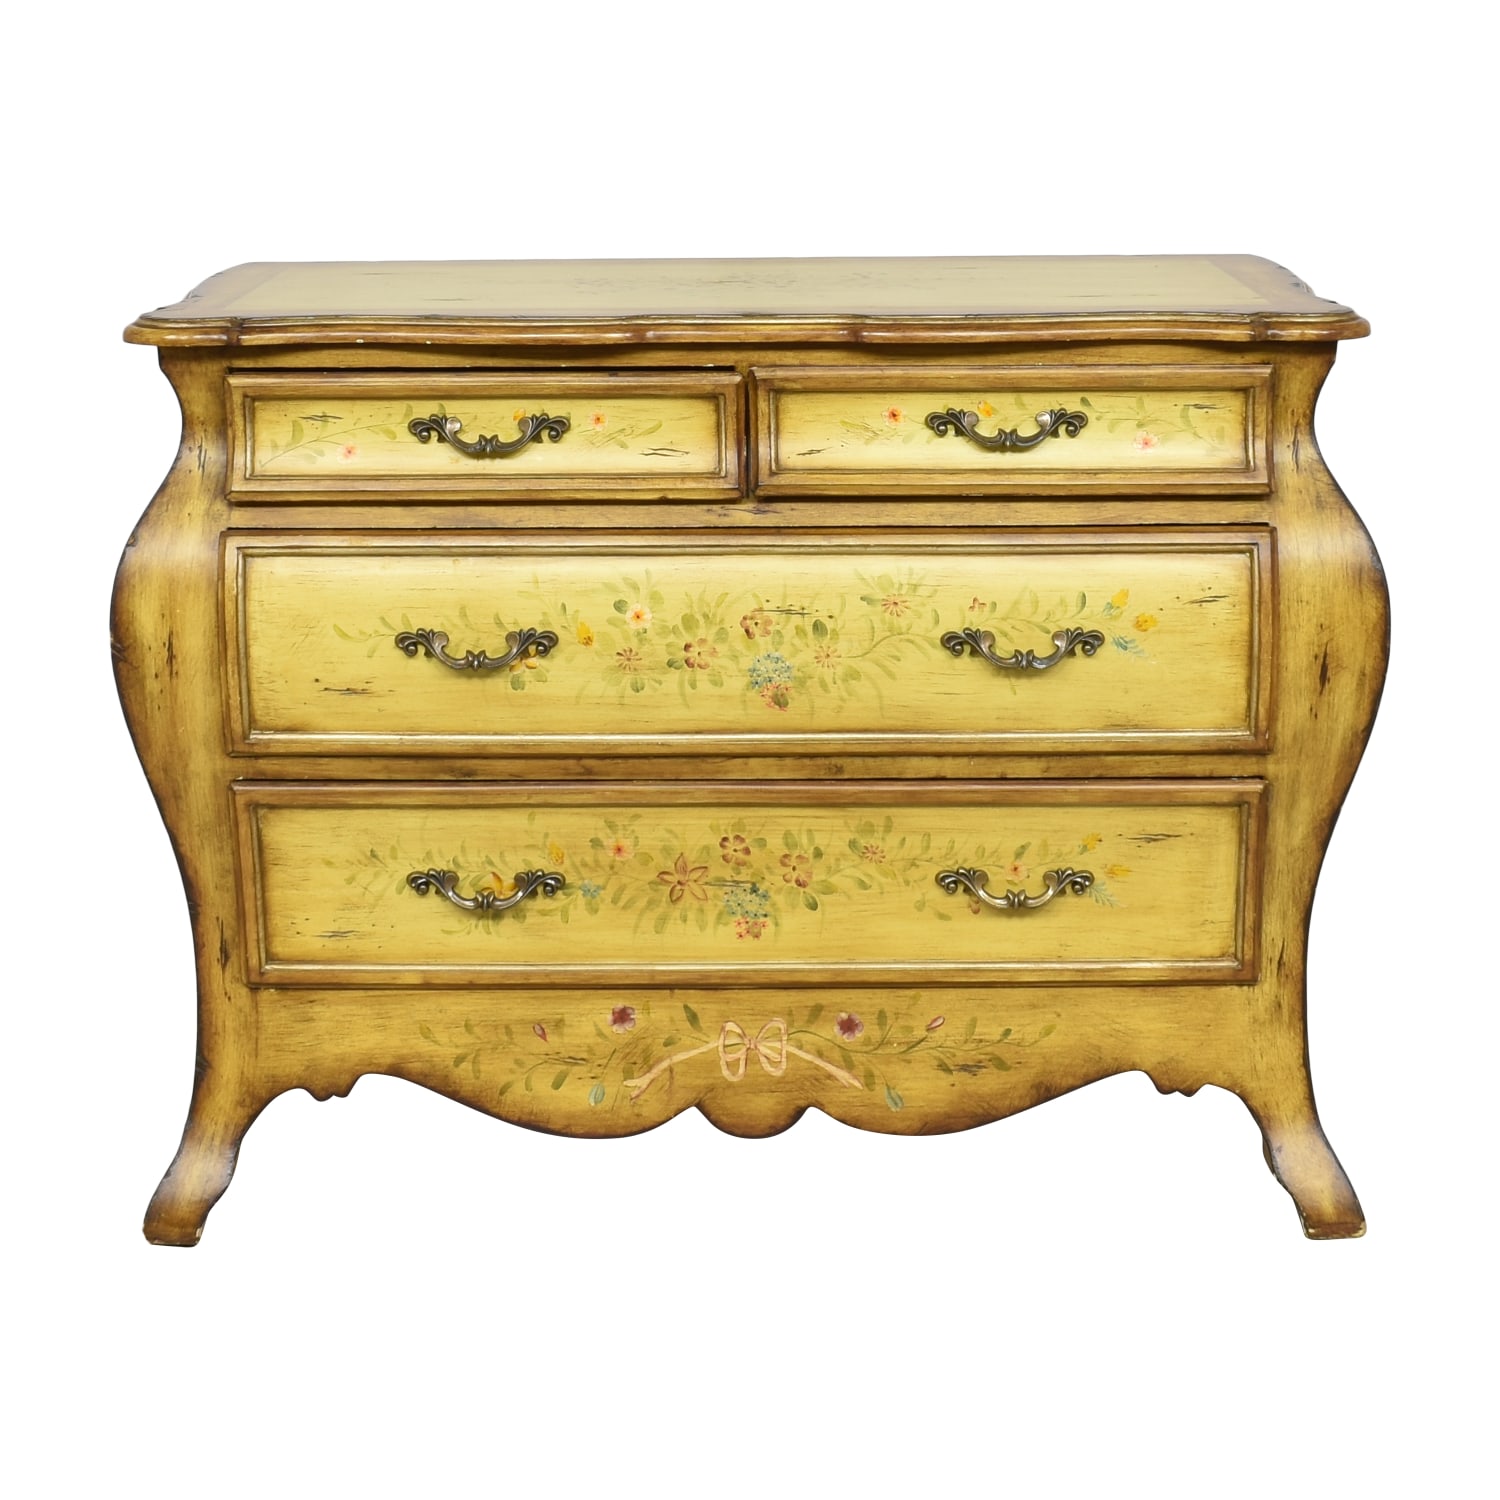 32 Louis Philippe Iii Chest White - Acme Furniture : Target